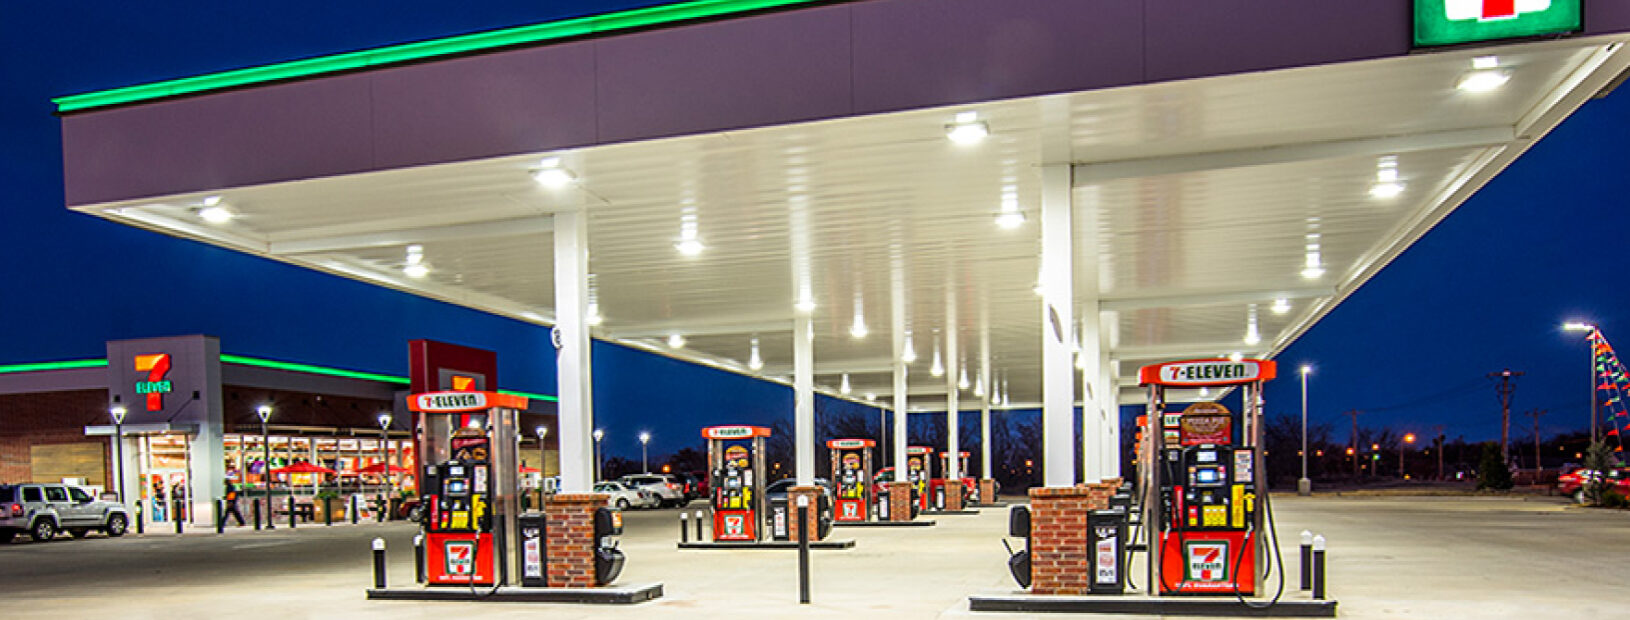 Wide-angle view of 7-Eleven gas station and c-store with fuel pumps in foreground